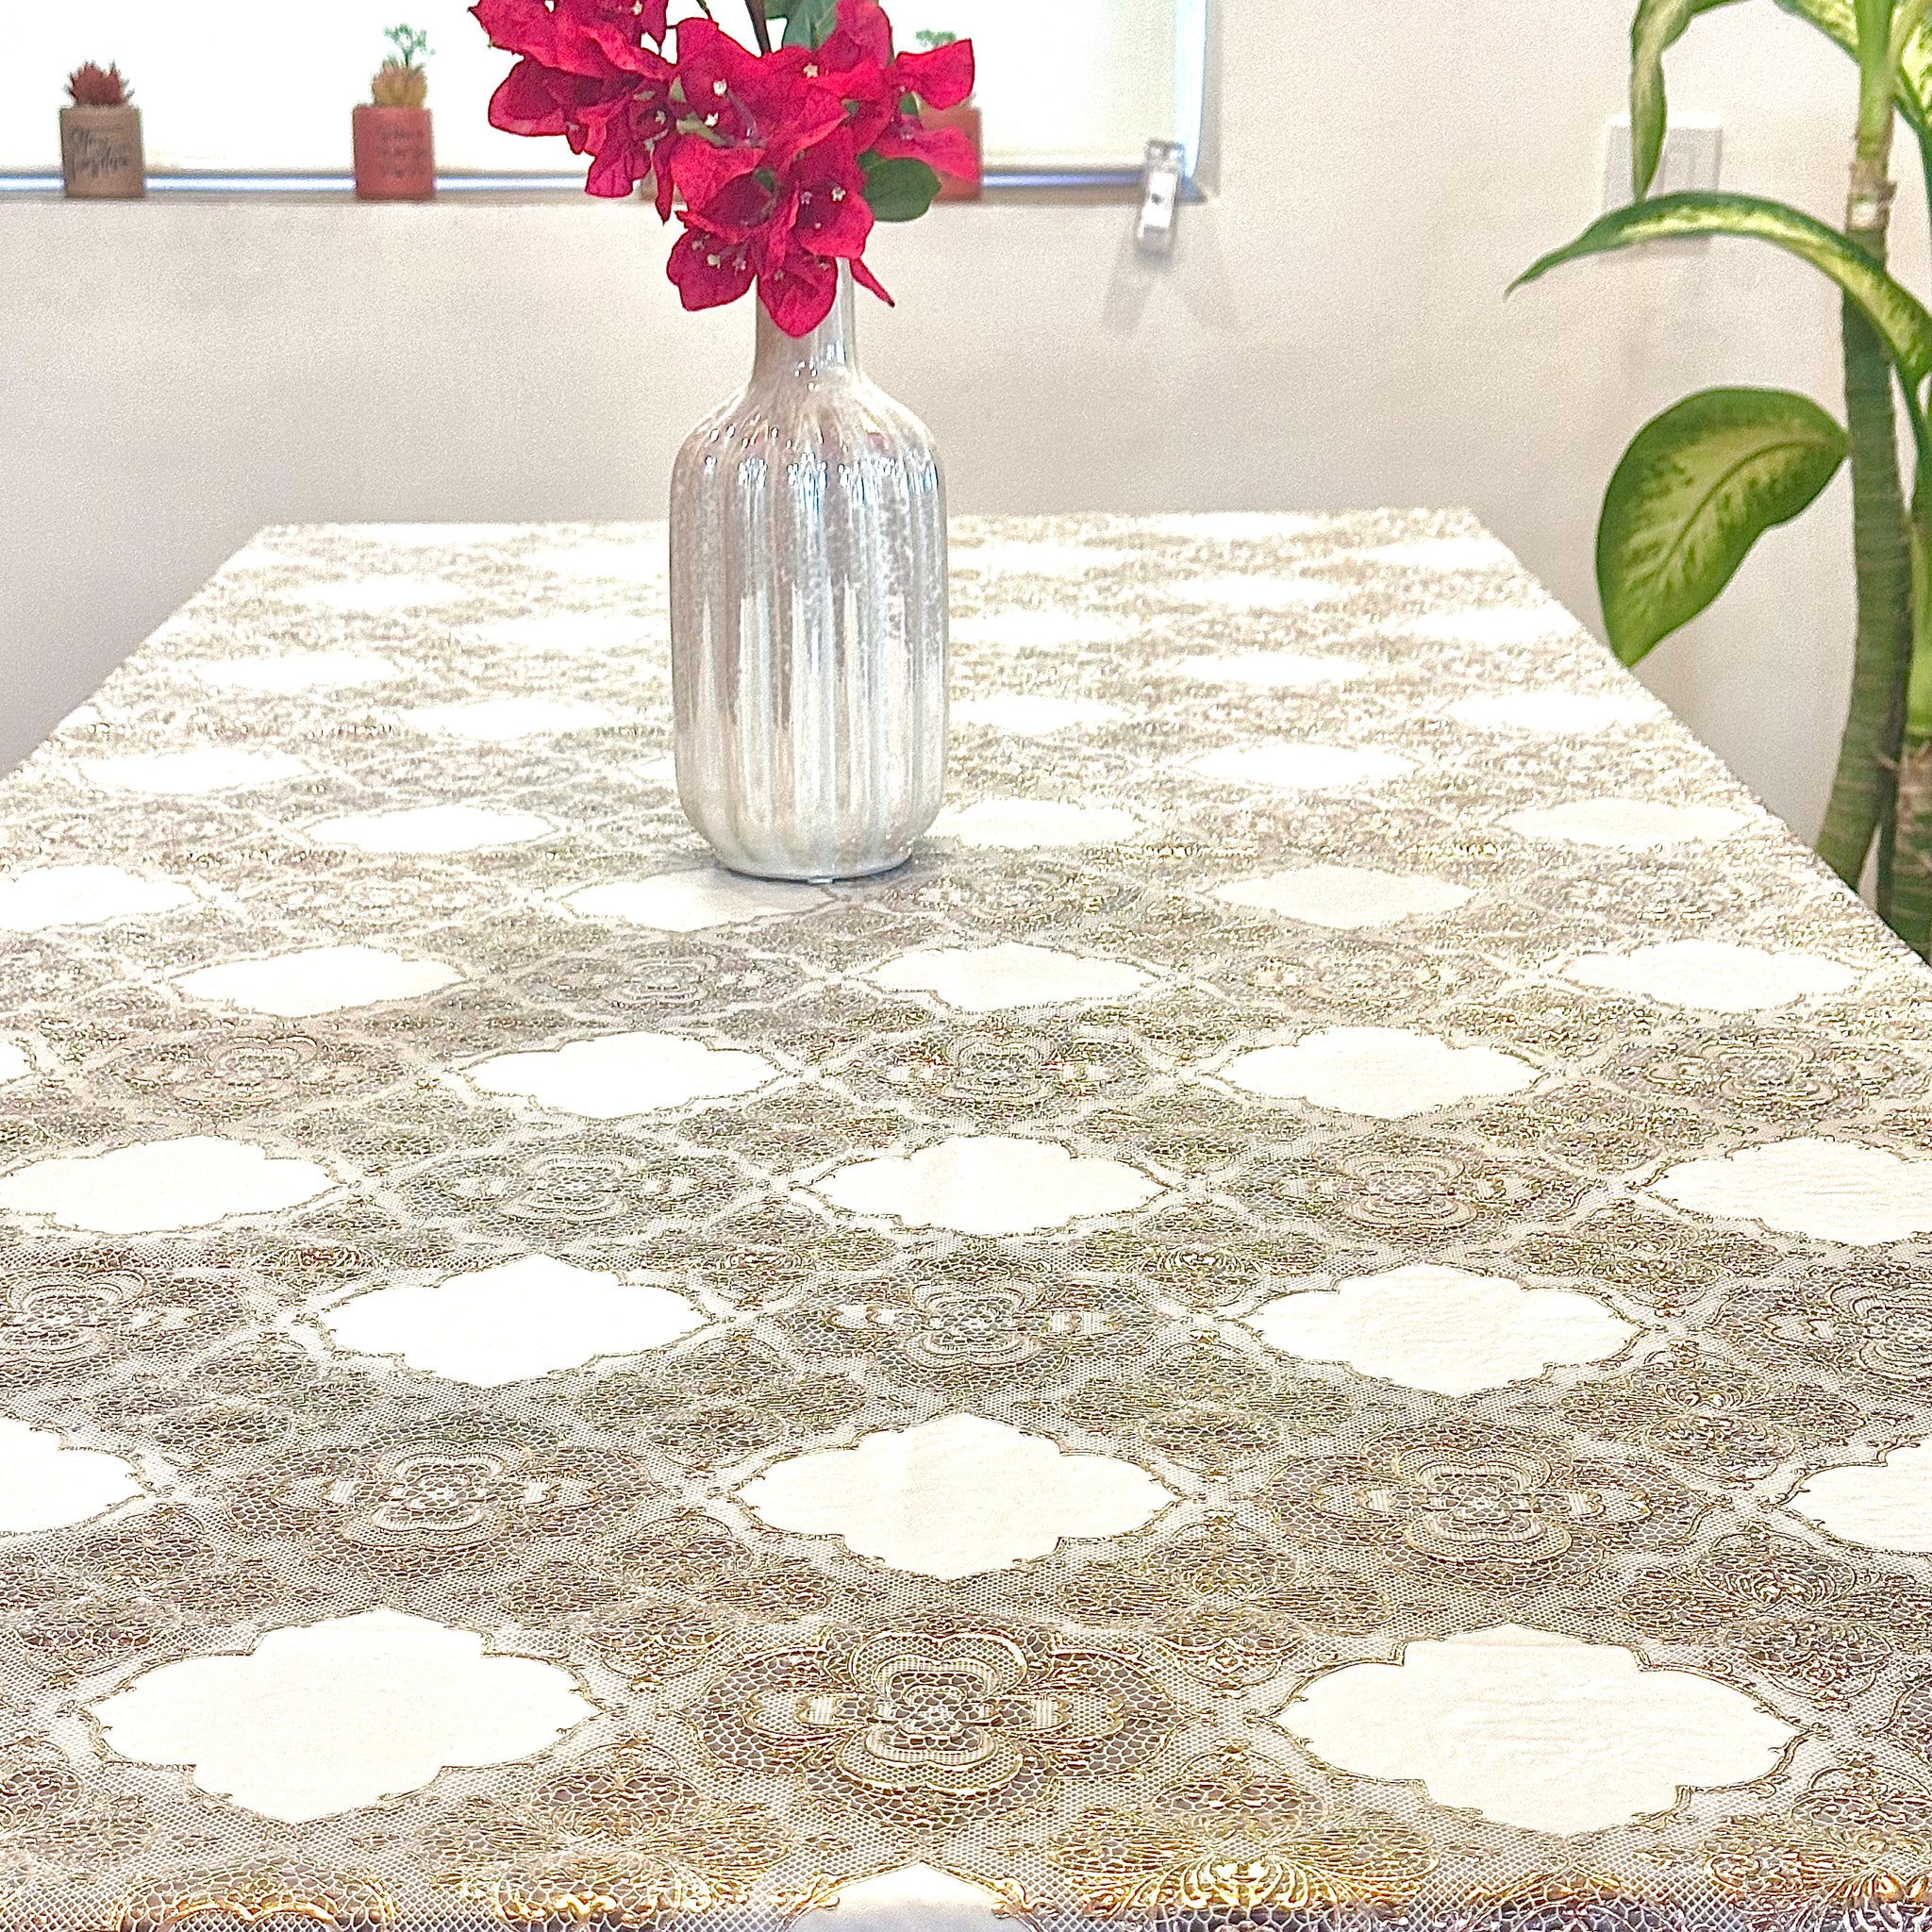 Floral Twist Metallic Table Cover